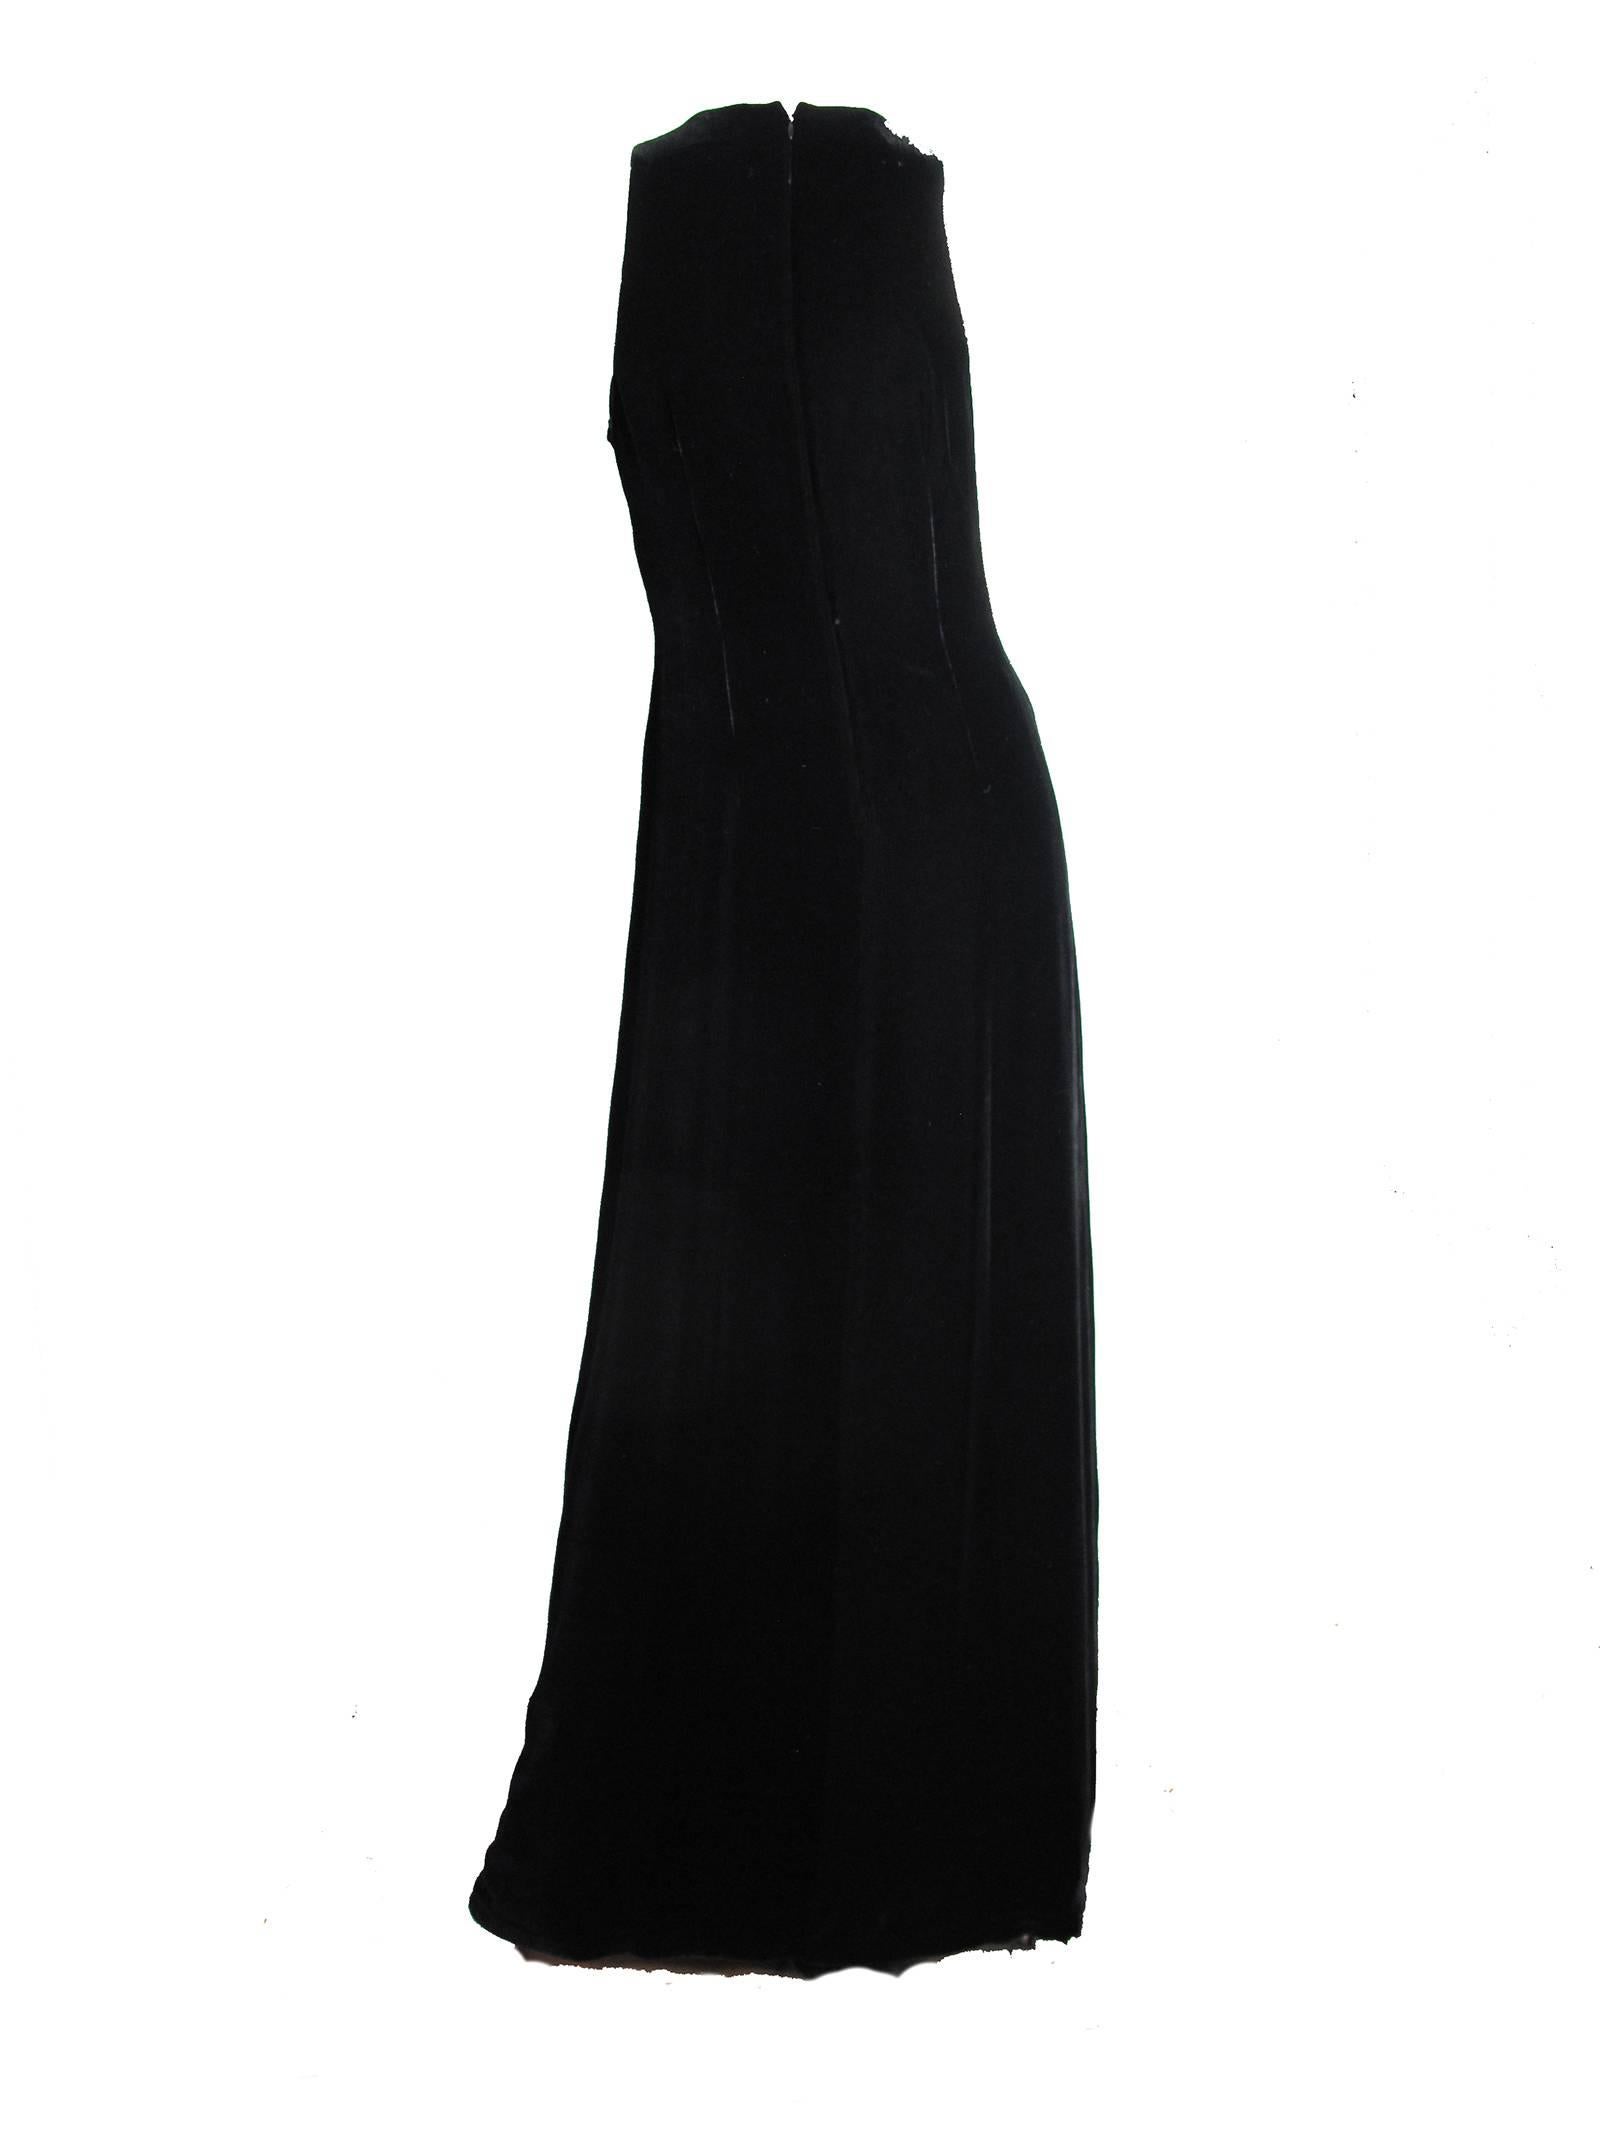 1990s classic Nicole Miller black velvet gown.  Condition: Excellent.
Size 8 ( mannequin is a size 6 ) 

We accept returns for refund, please see our terms.  We offer free ground shipping within the US